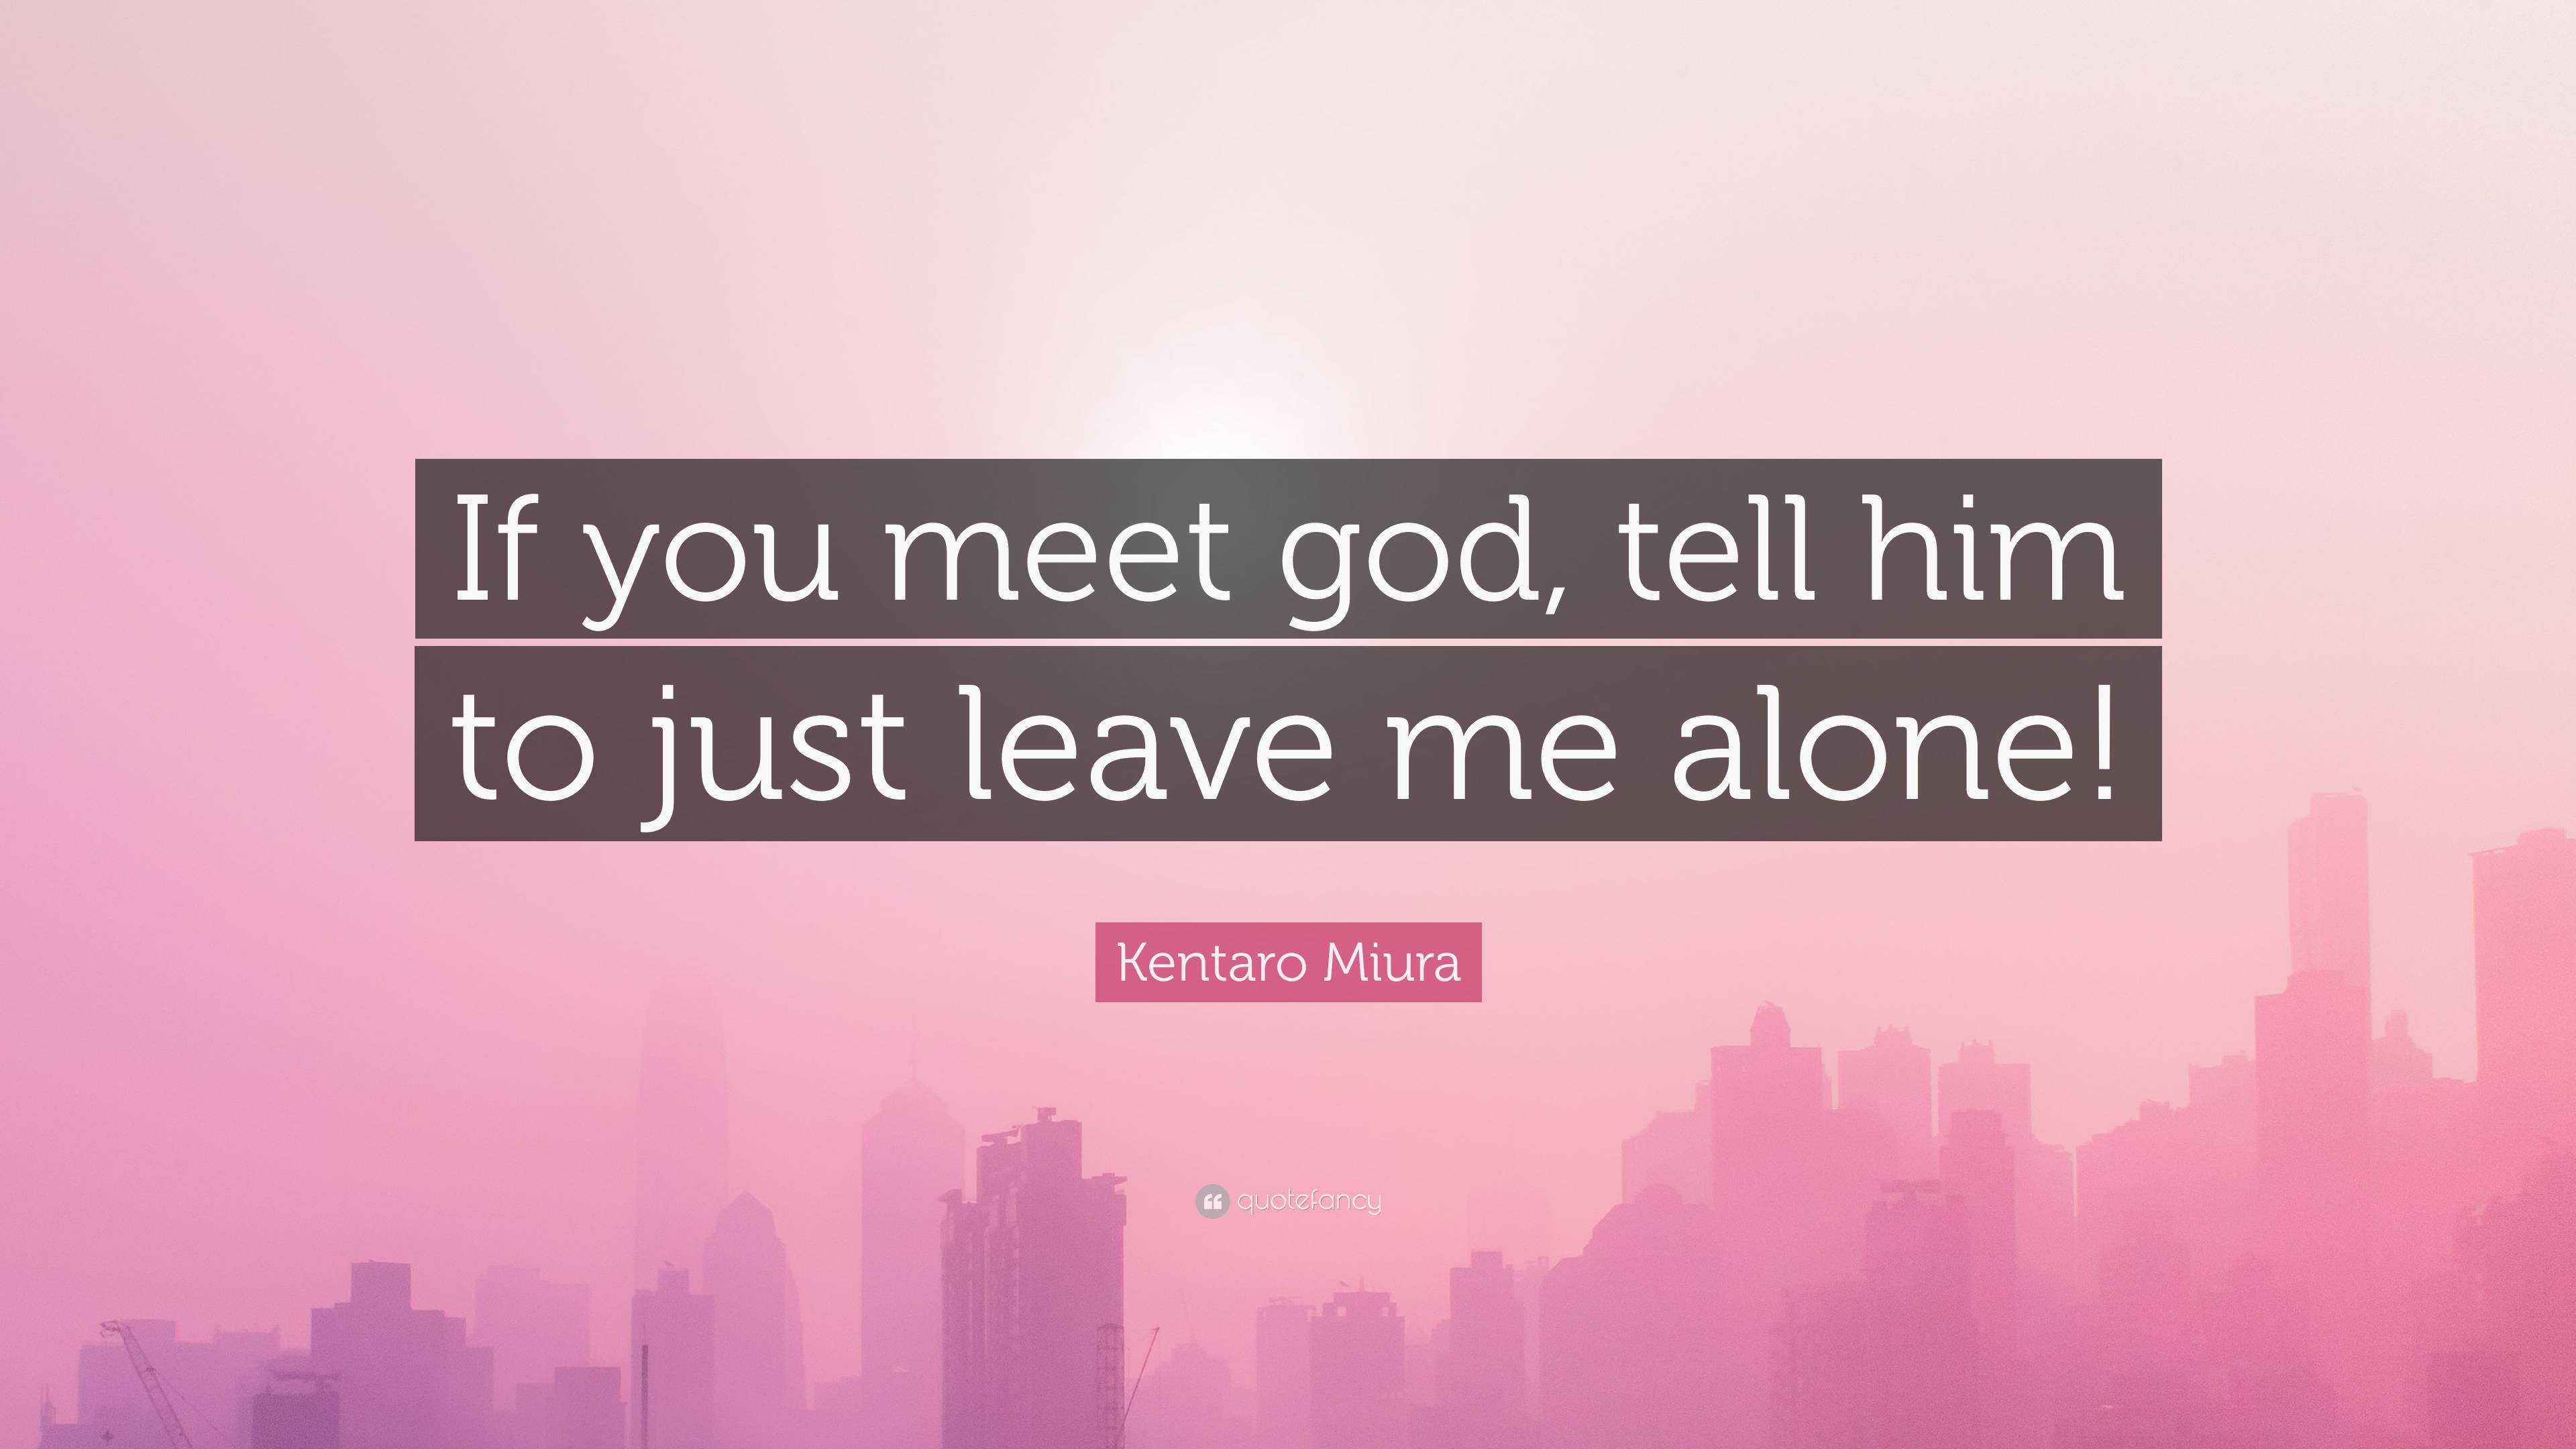 Kentaro Miura Quote: “If you meet god, tell him to just leave me alone!”